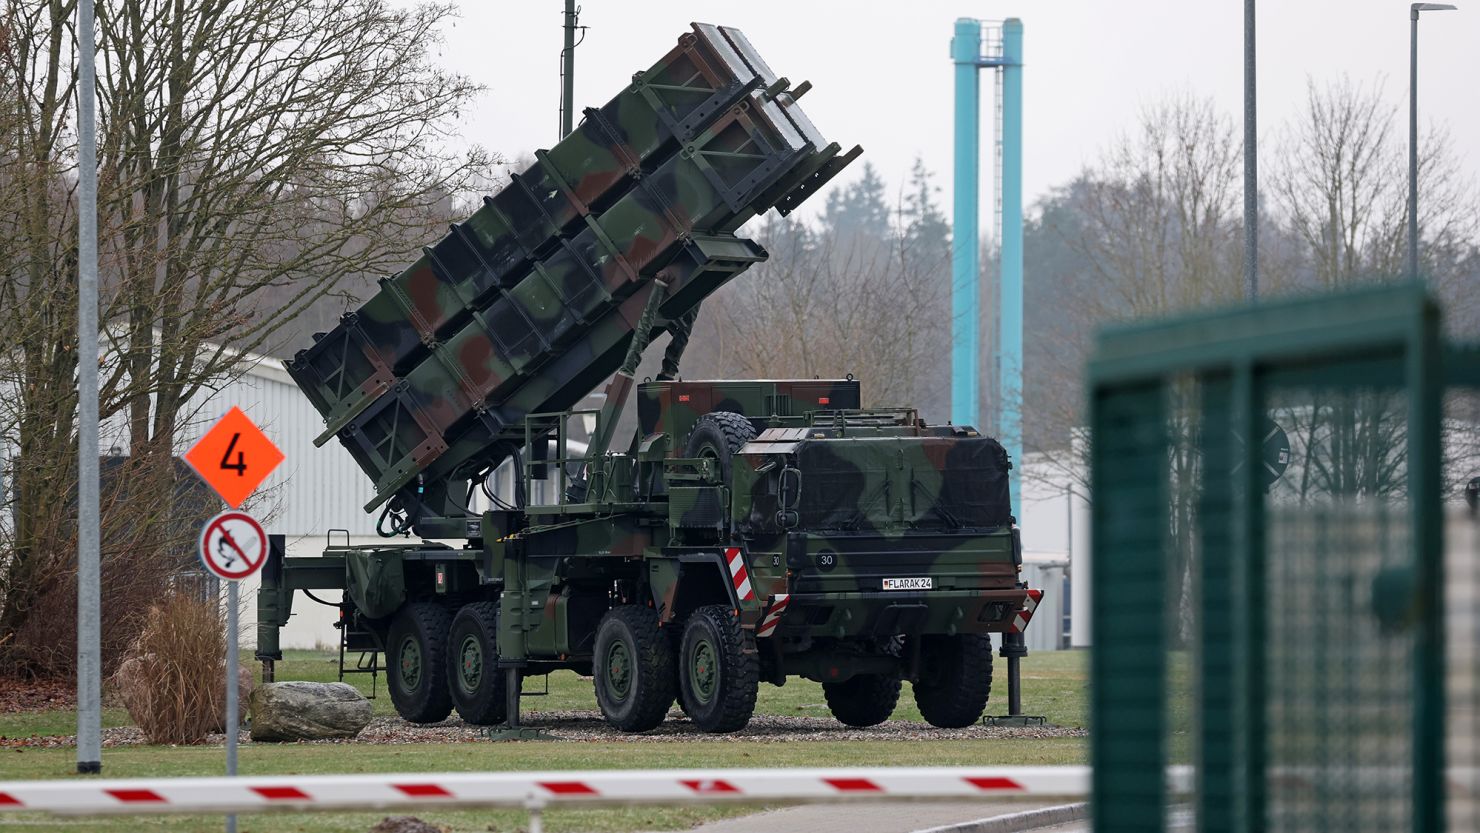 A Patriot air defense system, pictured in Germany in January.